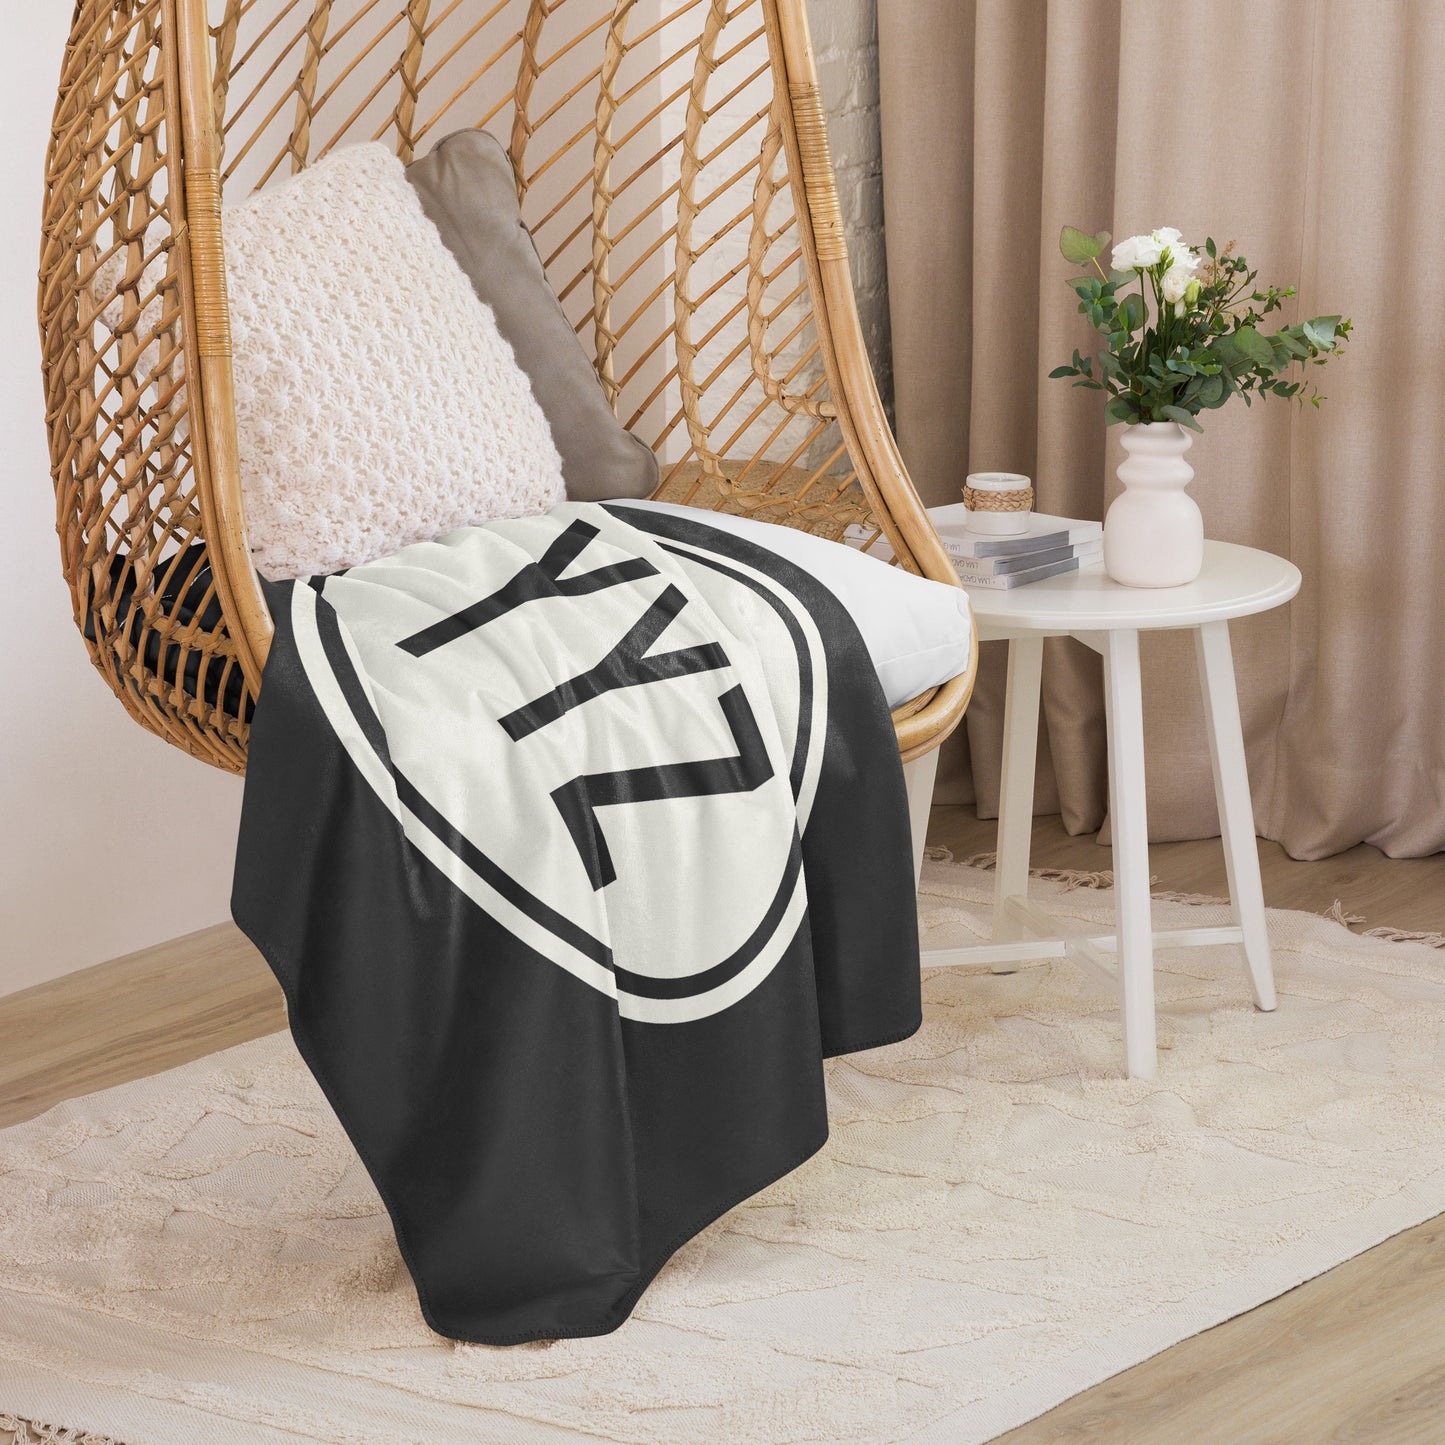 Unique Travel Gift Sherpa Blanket - White Oval • YYZ Toronto • YHM Designs - Image 06